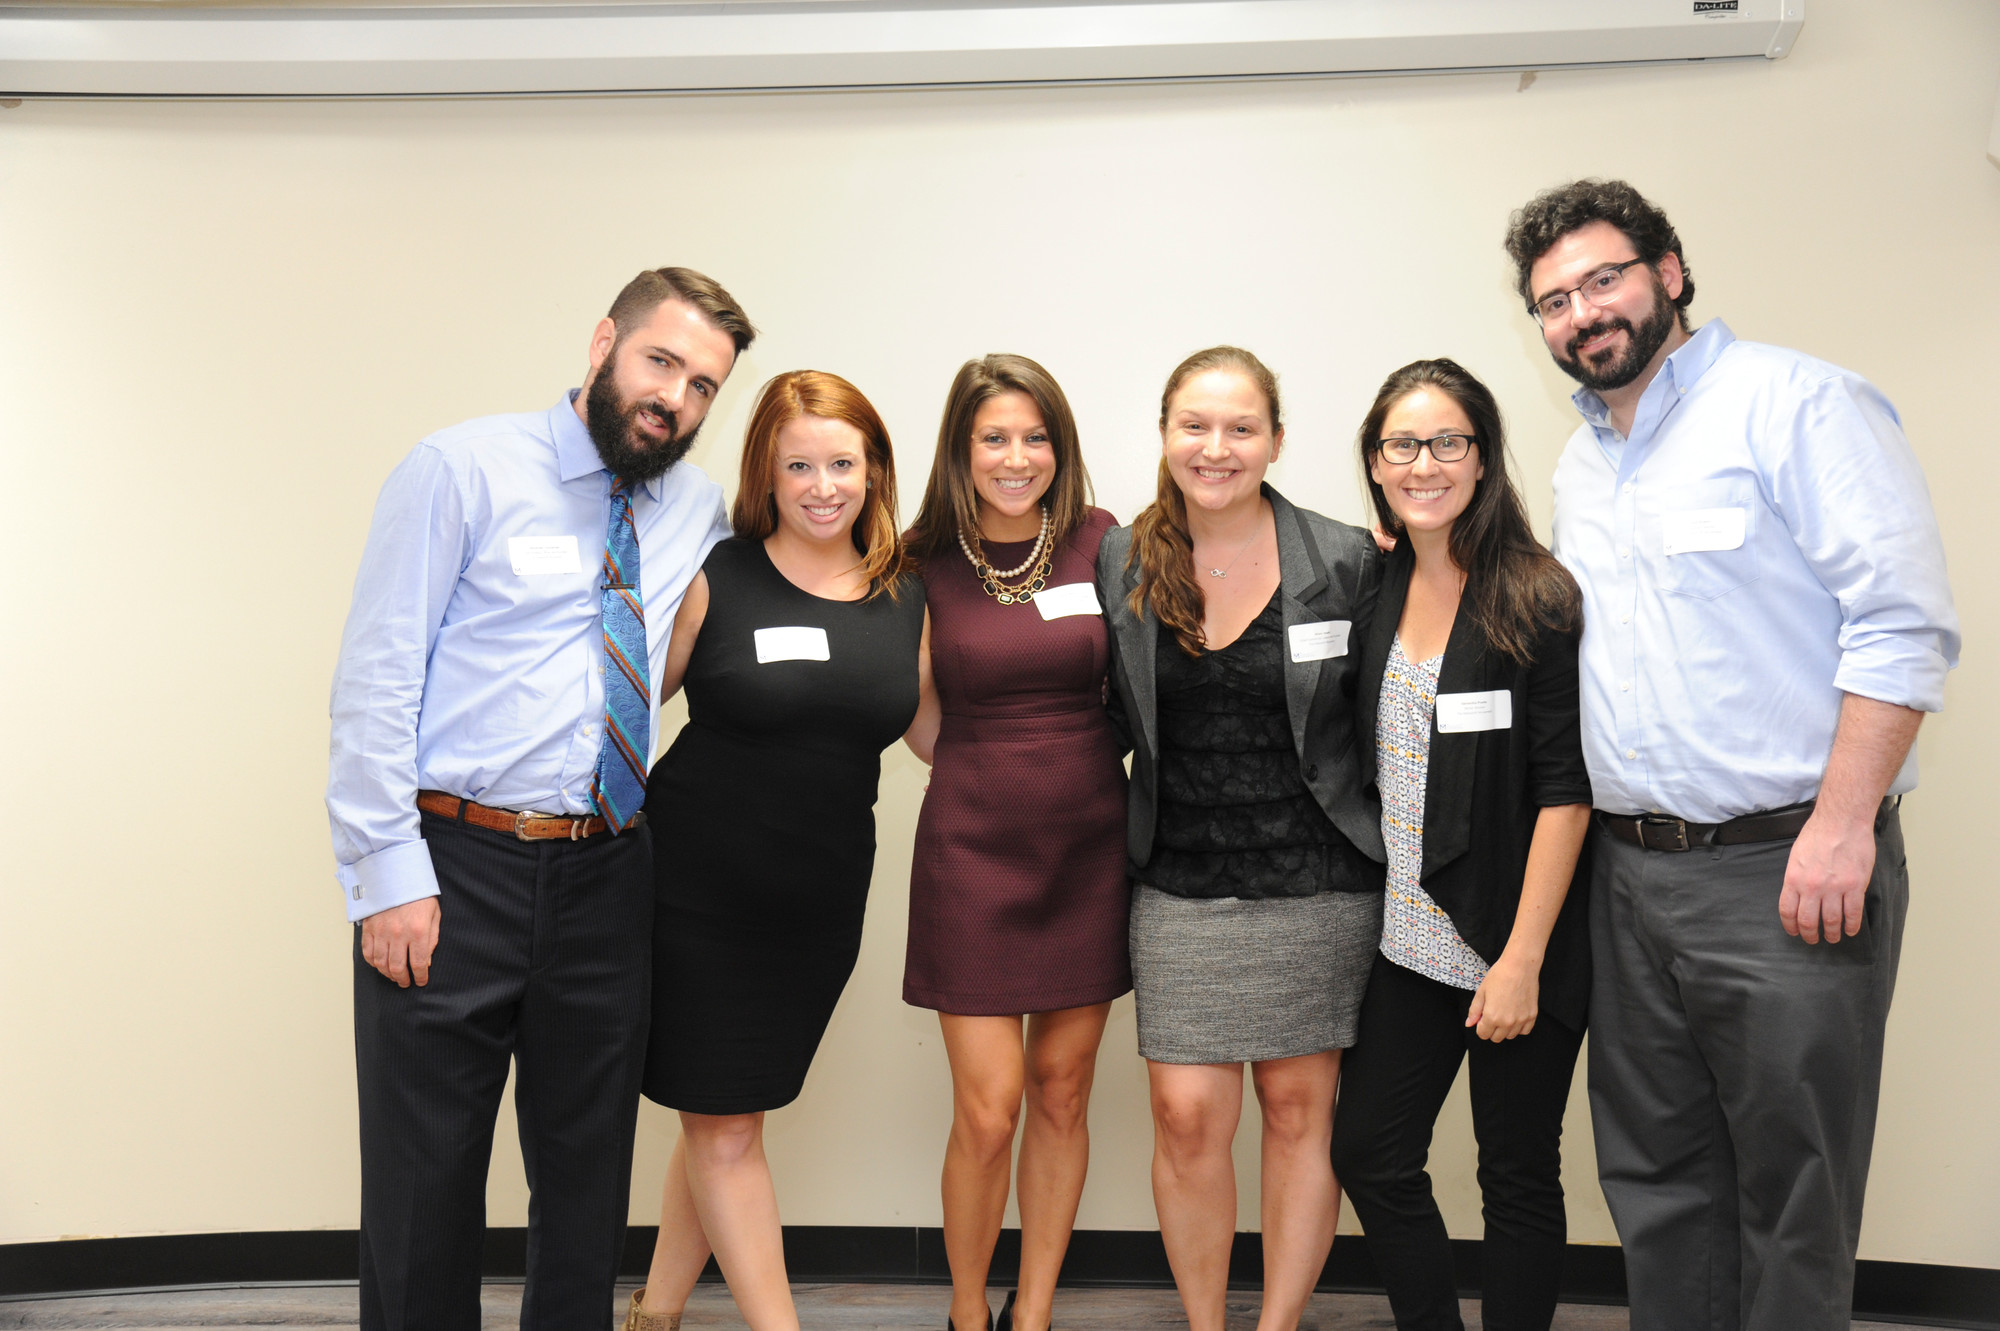 The board of the Makeshift Movement, from left: Alex Tucciarone, chief strategy officer and founder; Laure Peteroy, chief communications officer and founder; Jessica DiRocco, chief operations officer and founder; Alison Amato, chief community liaison and founder; Samantha Postle, senior adviser; and John Kuehn, director.